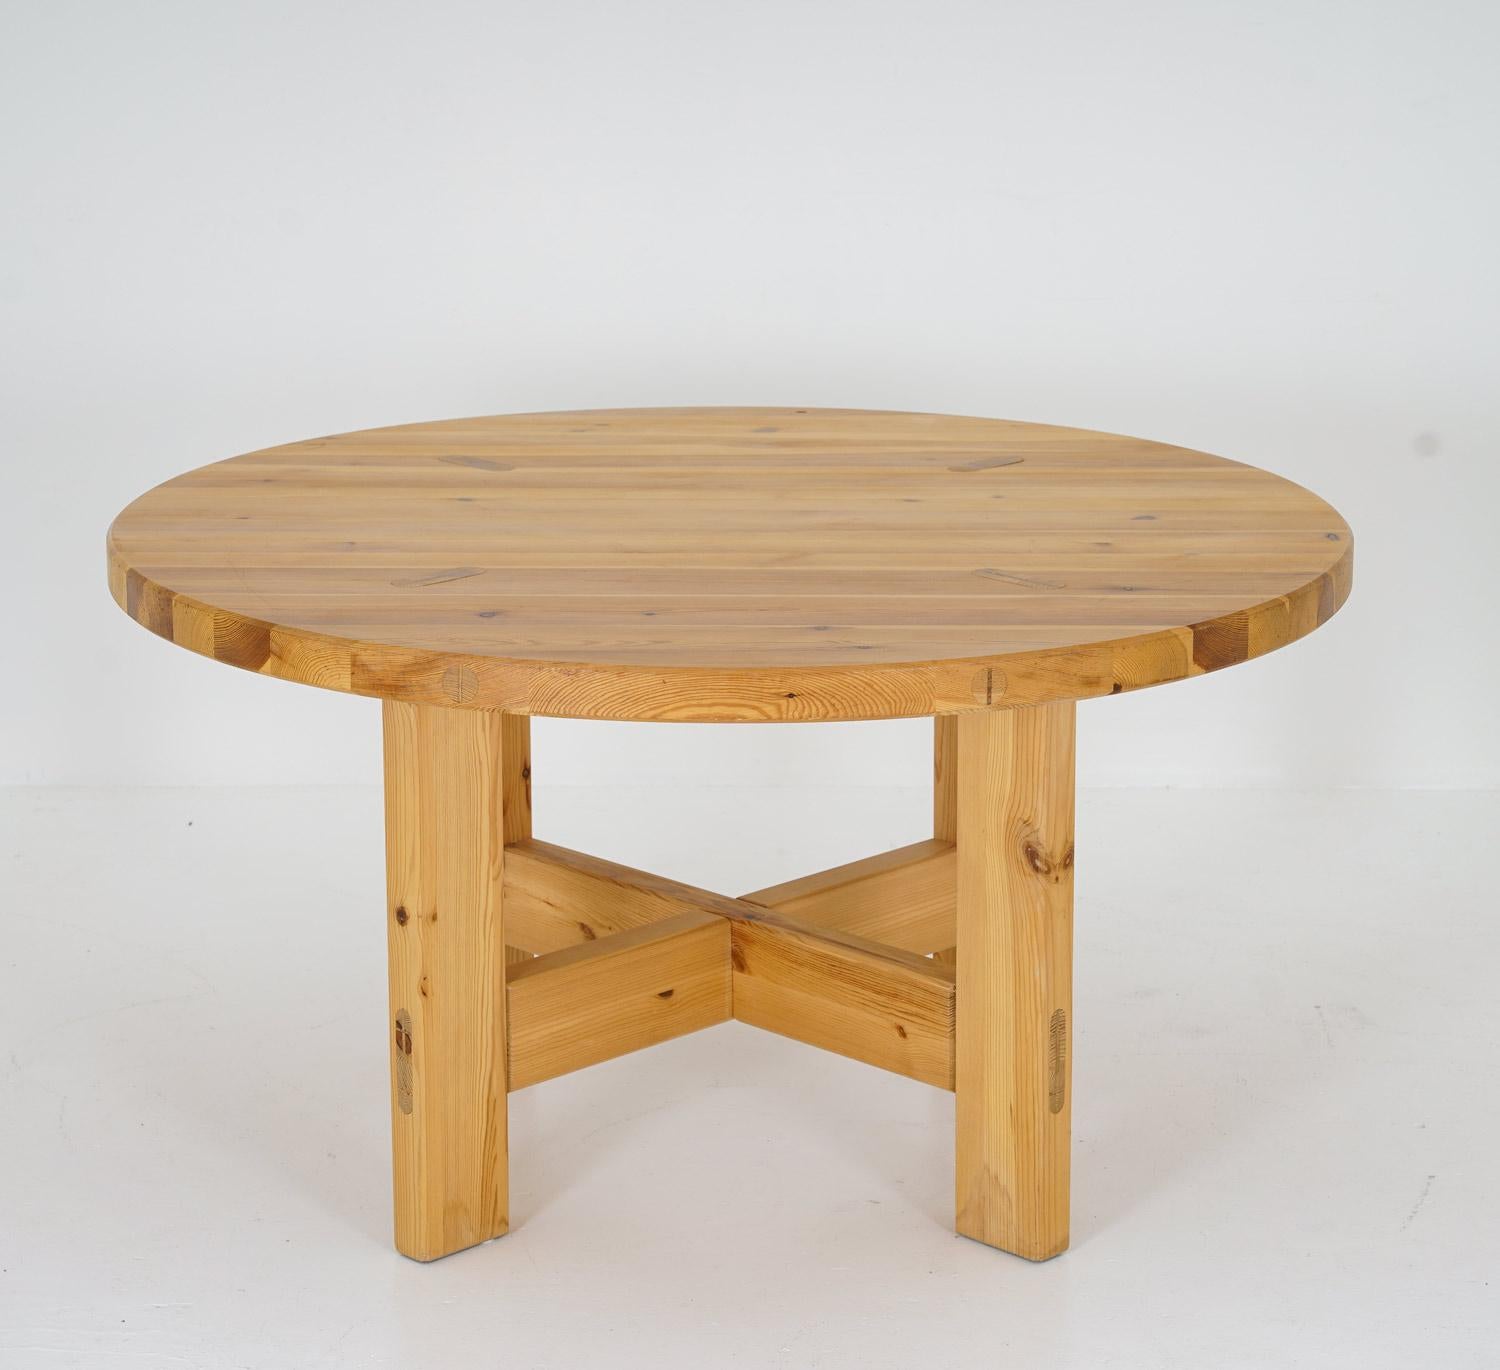 Large round dining table by Roland Wilhelmsson for Carl Andersson & söner, Sweden, 1970s. 

Beautiful table with Wilhelmsson’s significant visible joinery. 

Condition: Good original condition with age-related wear. Water stains on the legs, as